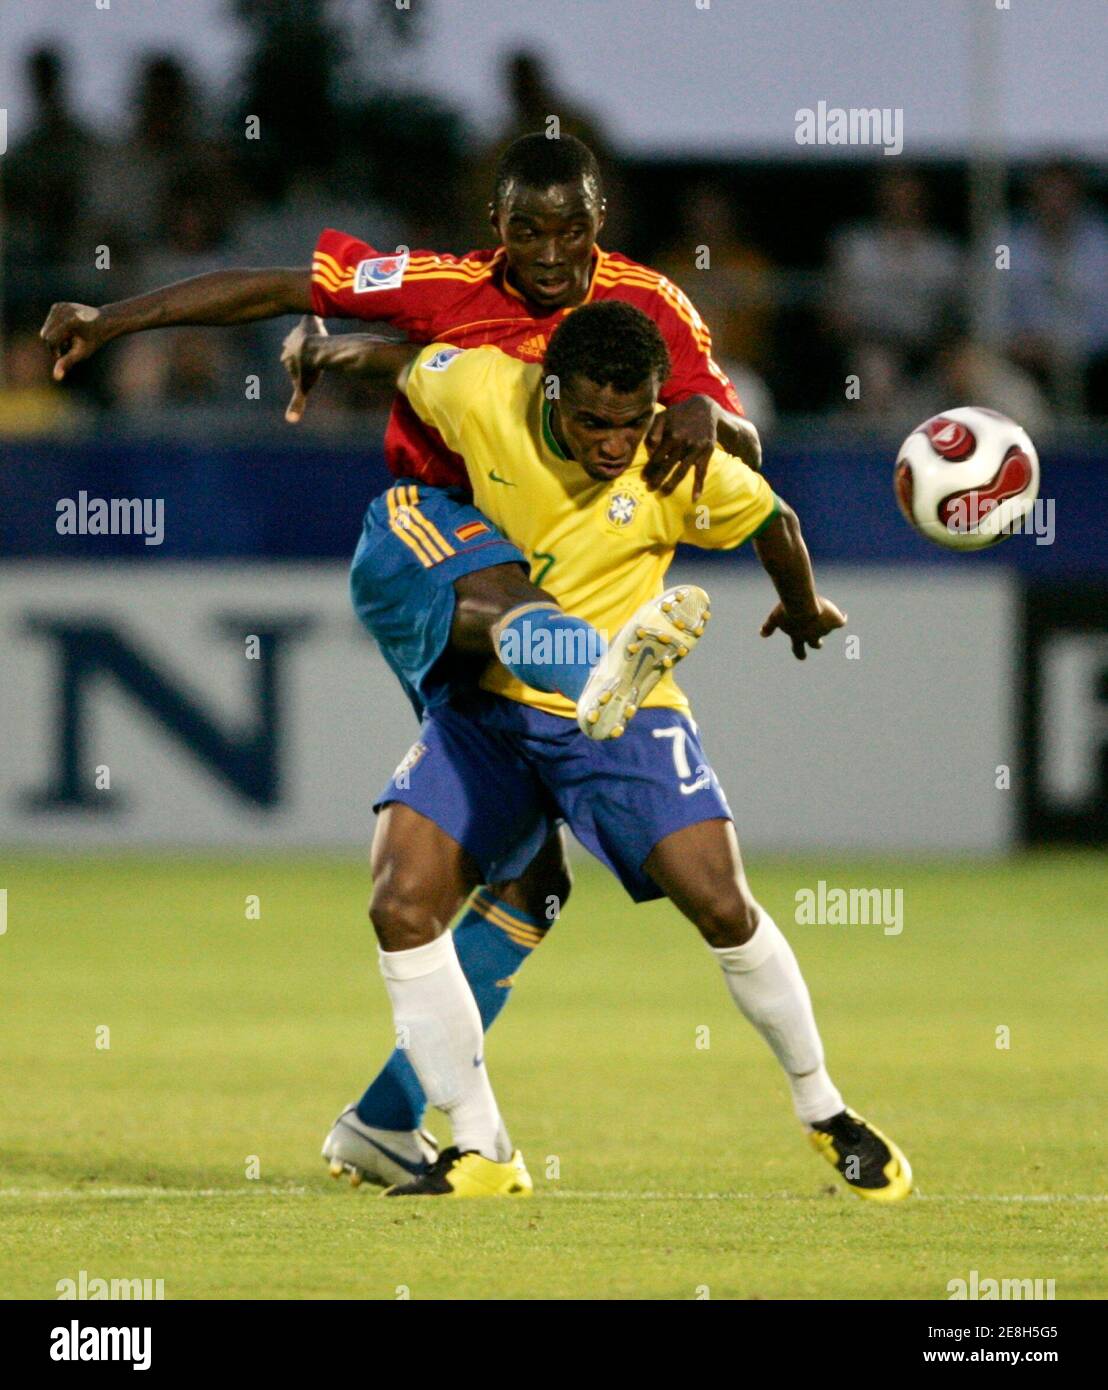 Spain's Sunny Stephen (top) and Brazil's Willian compete for the ball during their Round of 16 match at the FIFA Under-20 World Cup soccer tournament in Burnaby, British Columbia July 11, 2007.     REUTERS/Andy Clark (CANADA) Stock Photo